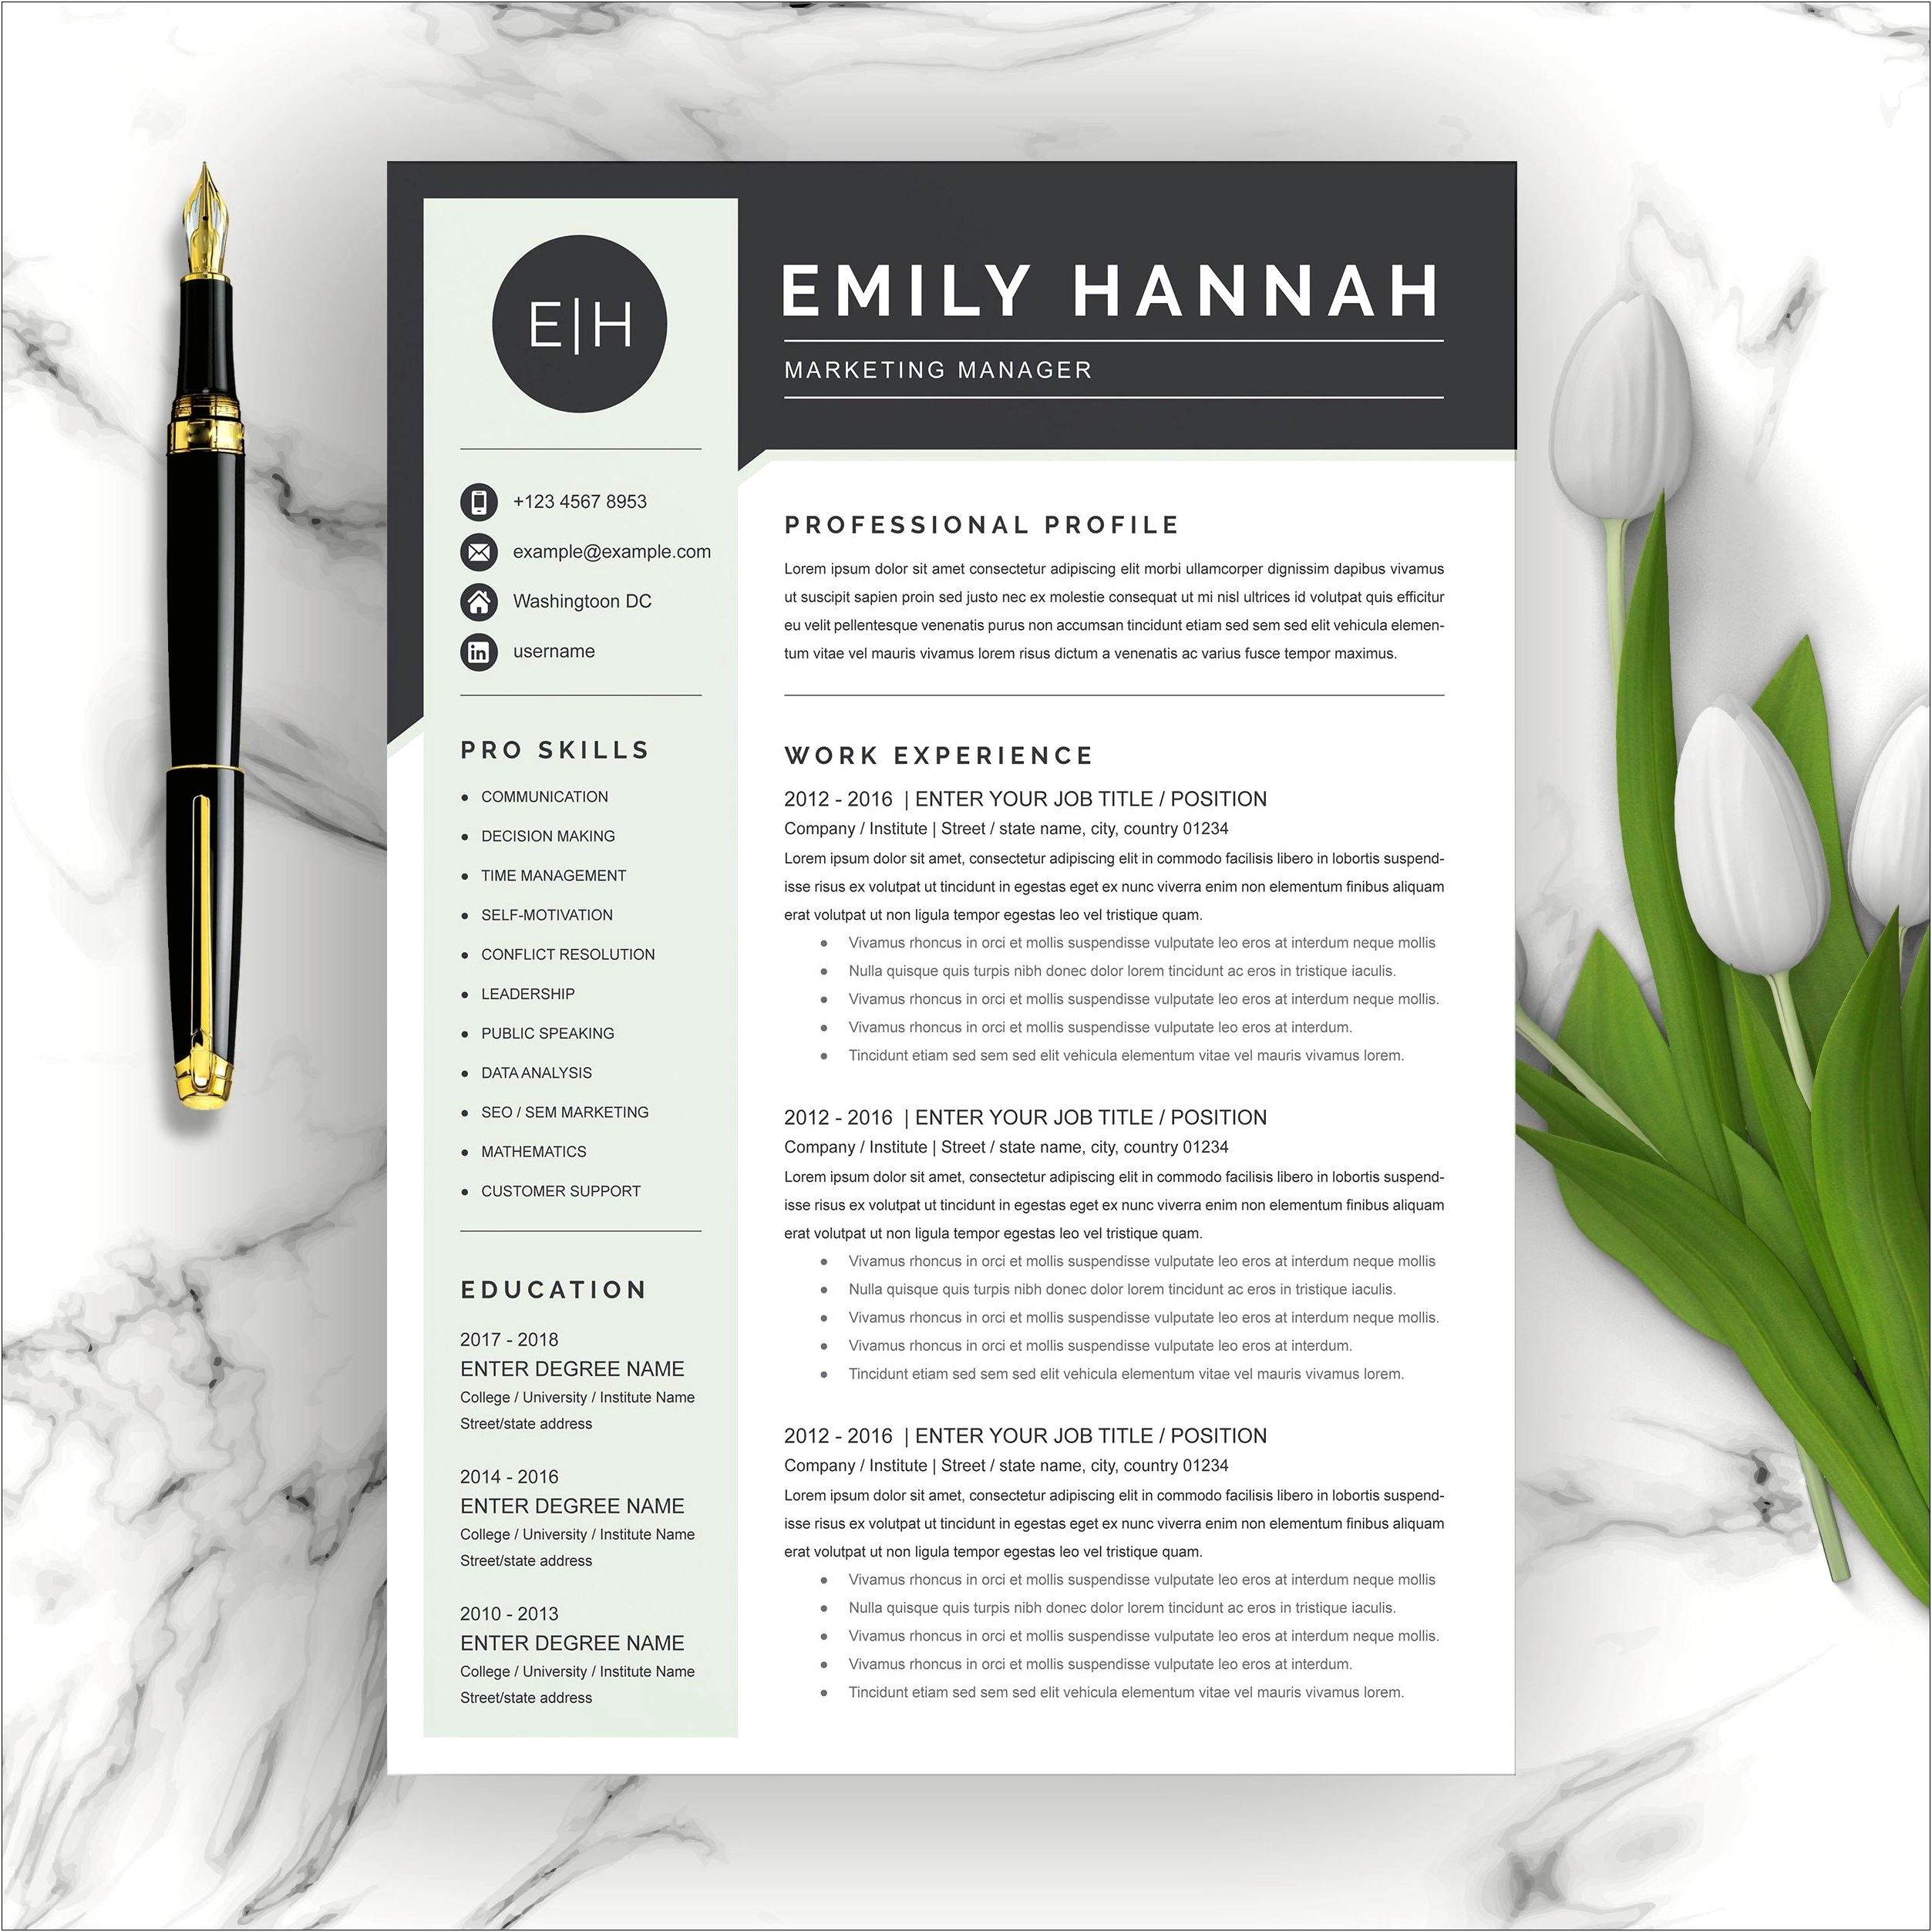 Resume Format For Marketing Manager